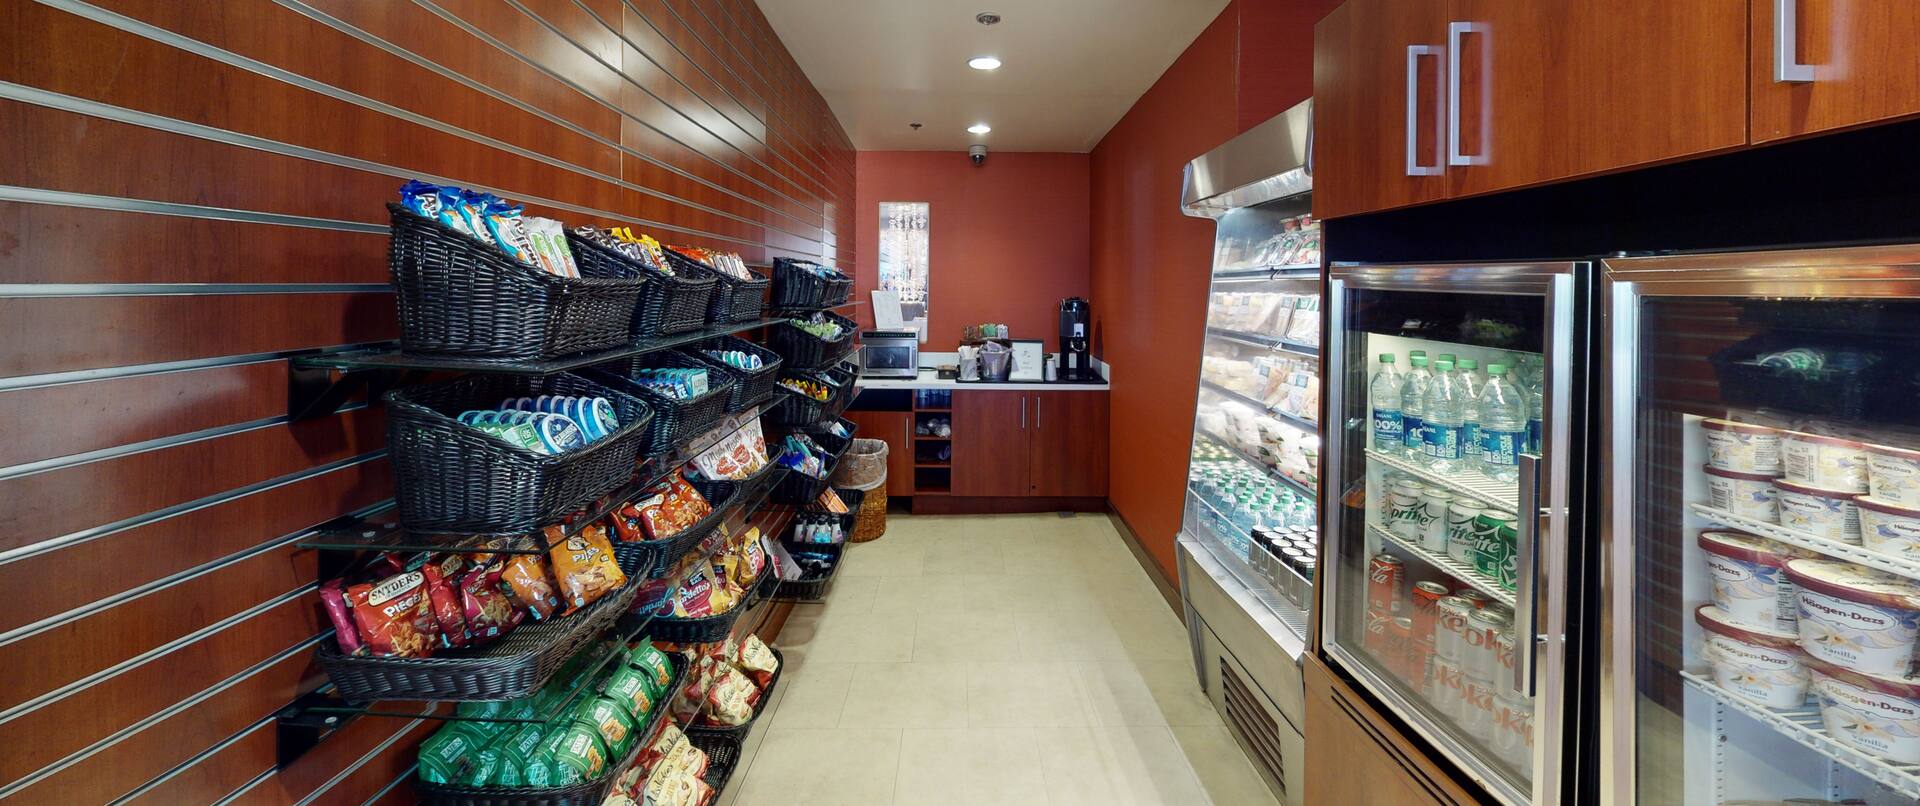 Shop area with snack displays and shelves